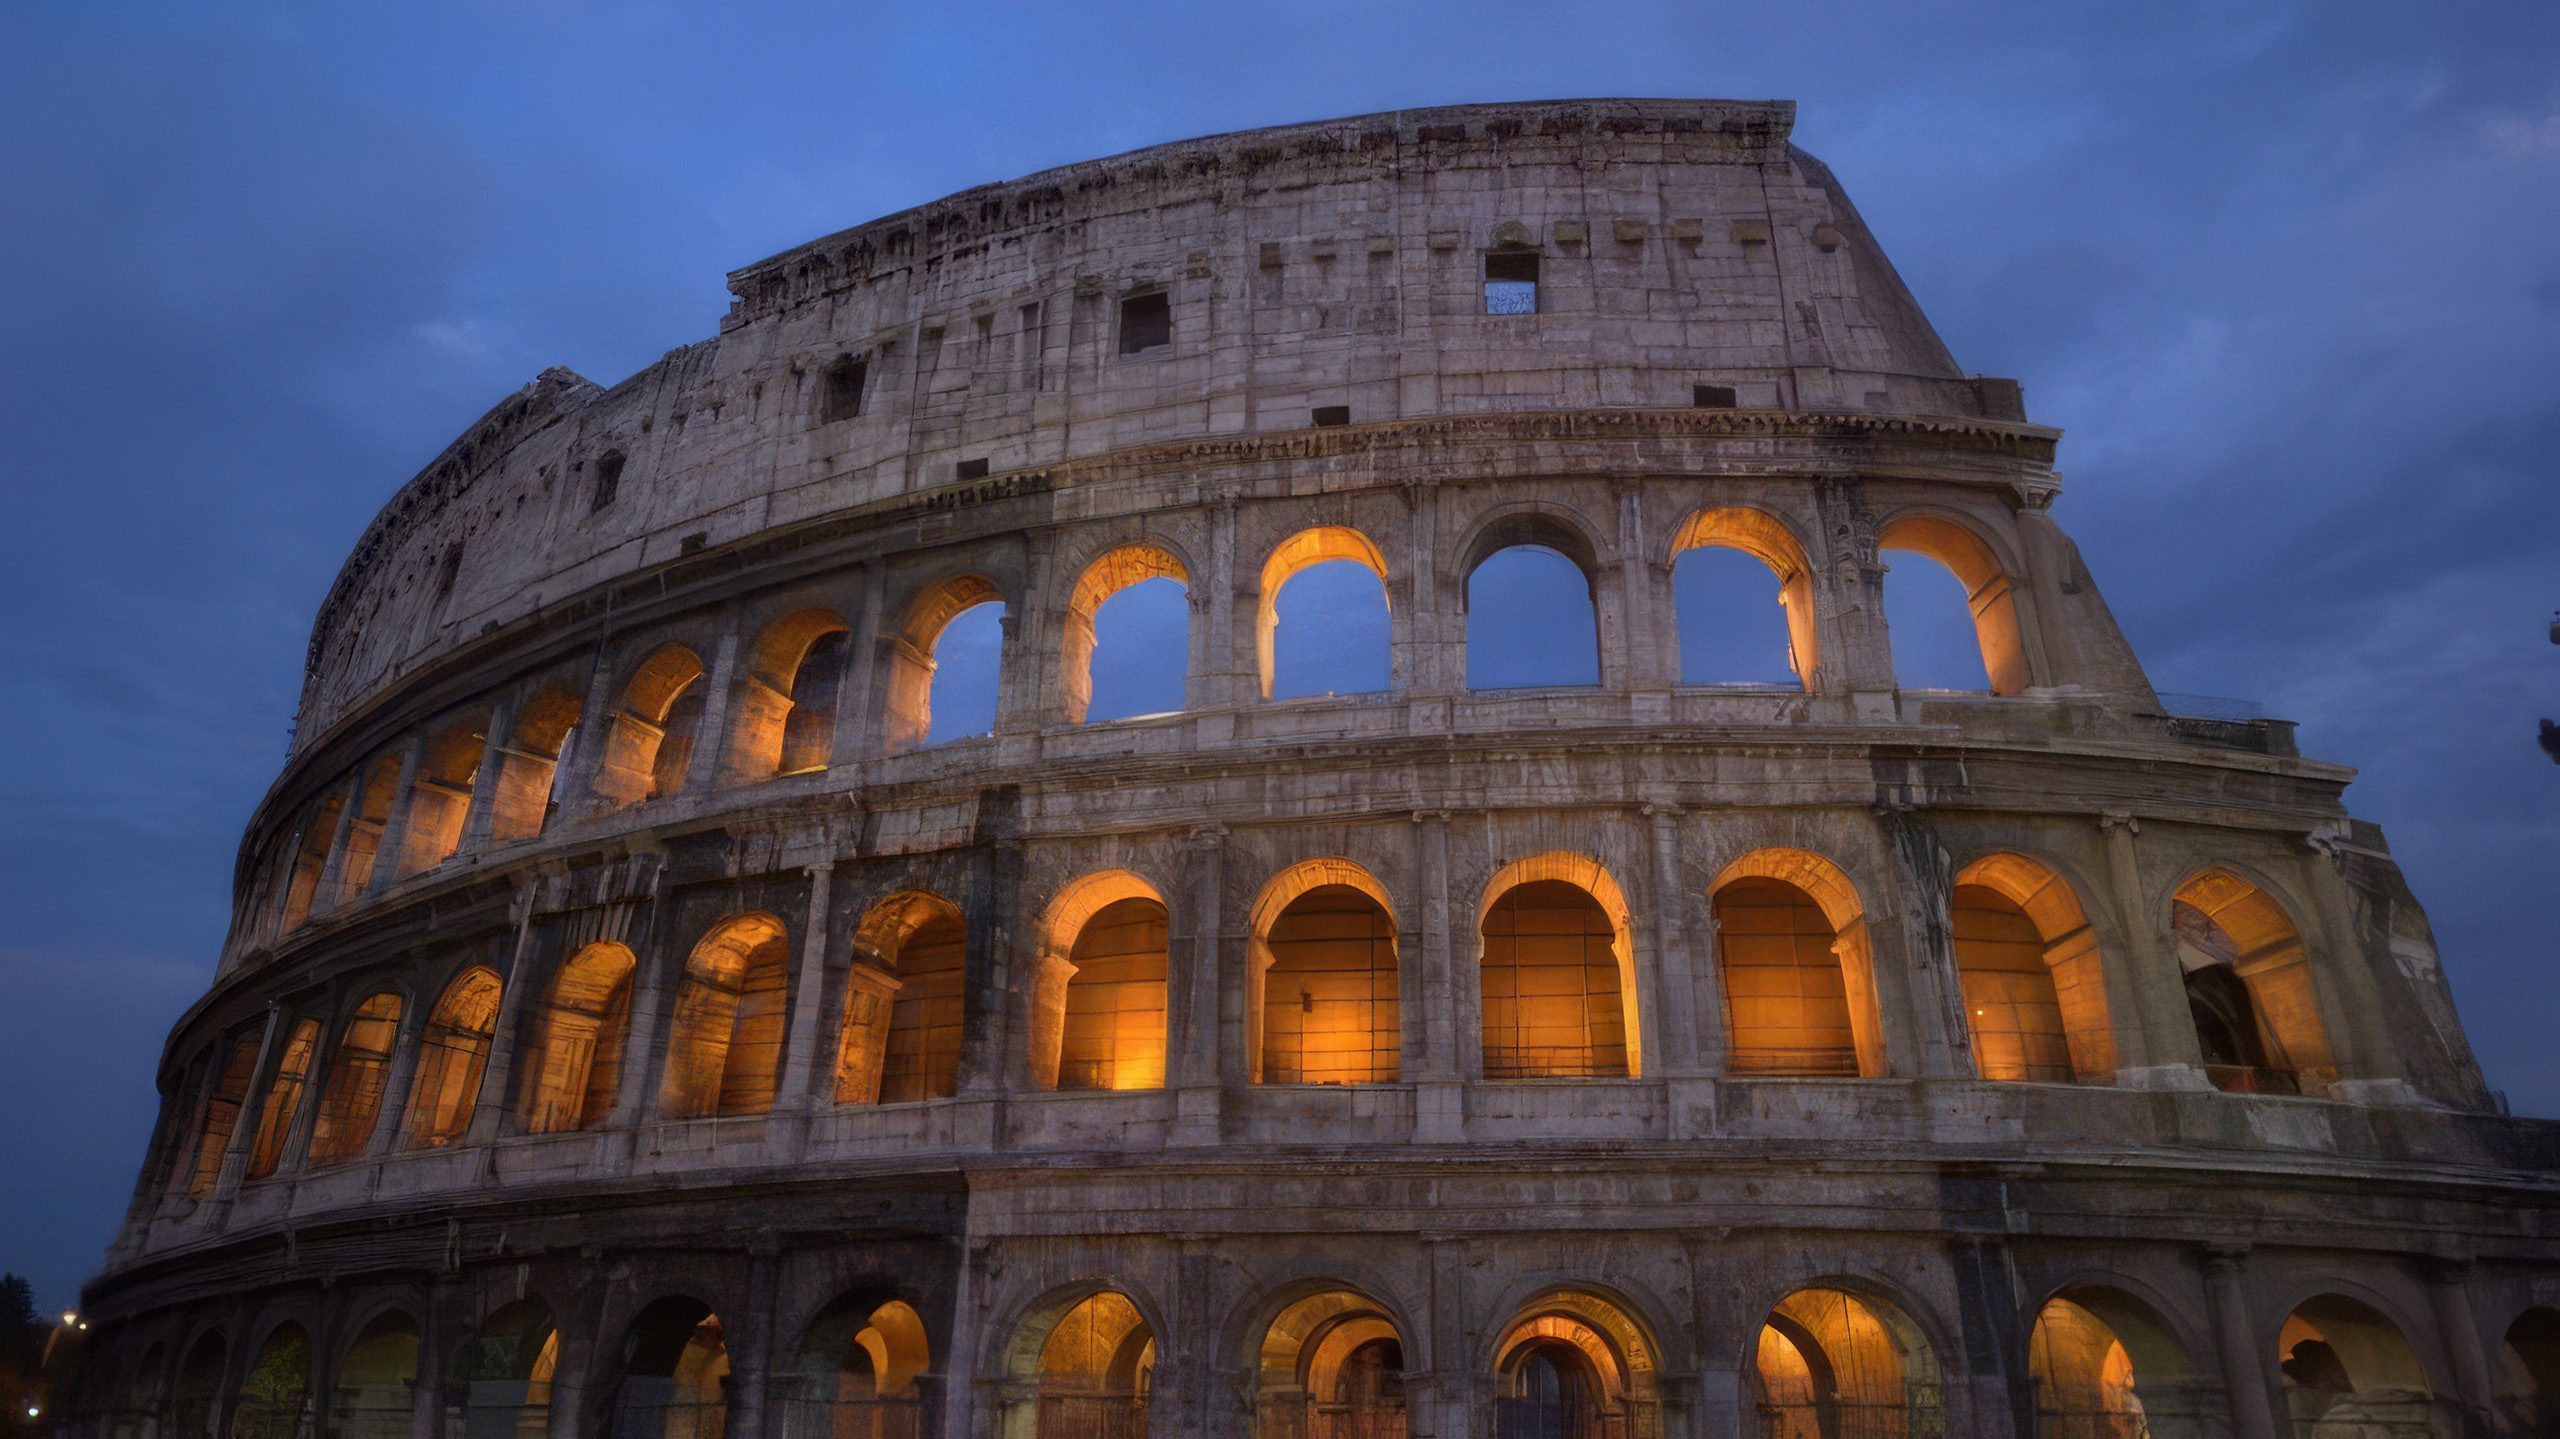 The Colosseum in Rome, Italy | Davidsbeenhere